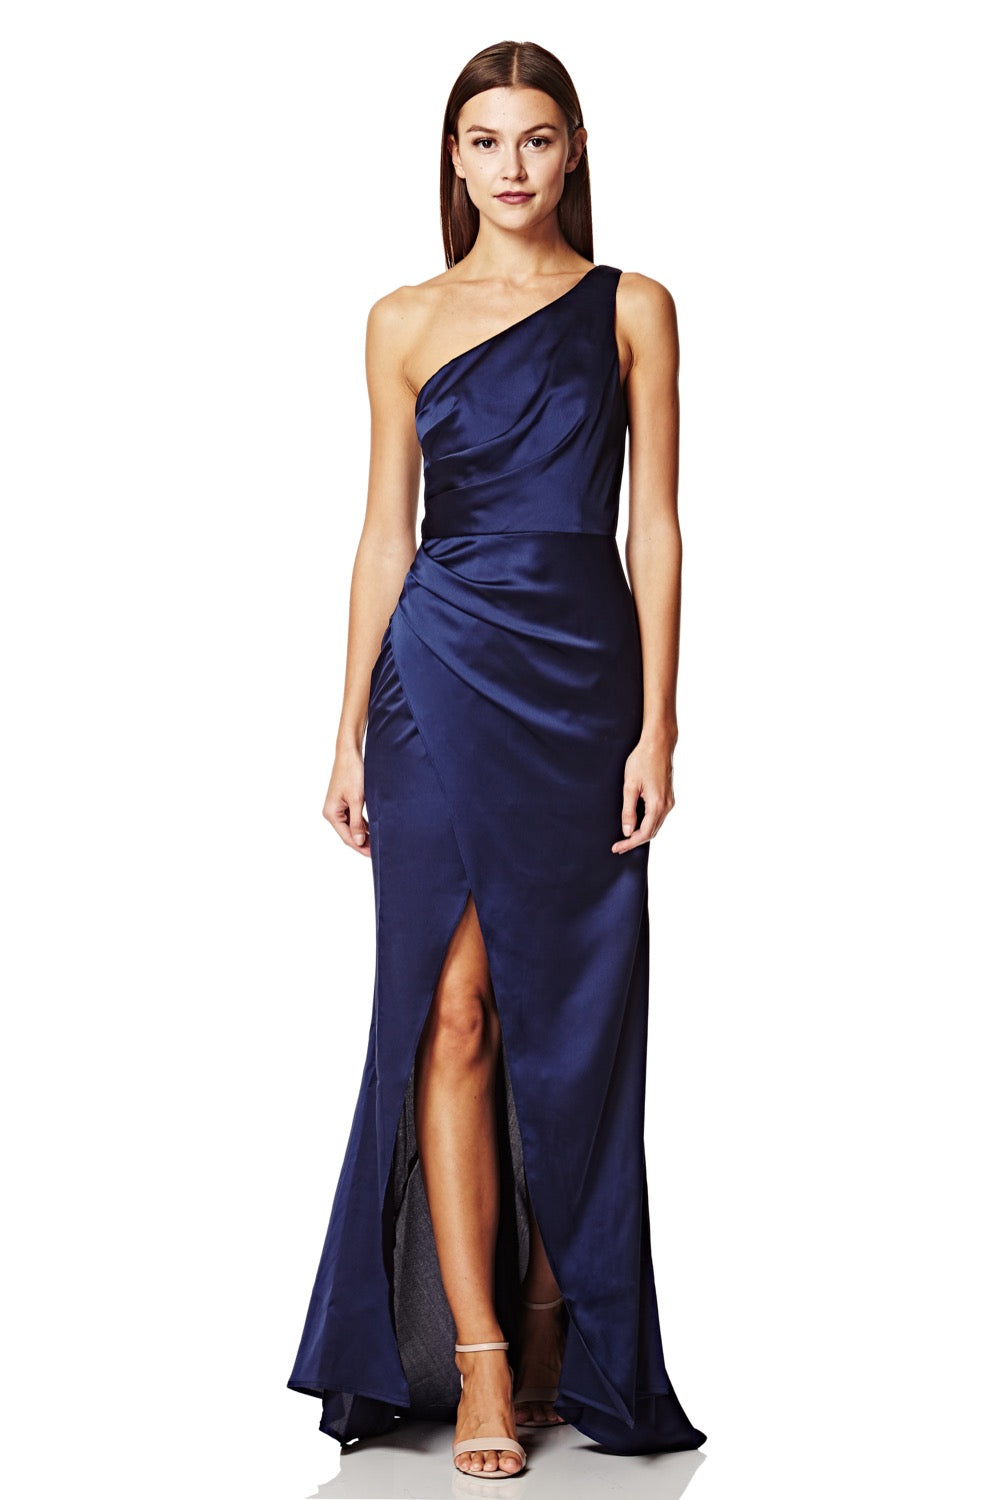 Jarlo Lisa one shoulder navy satin maxi dress with pleat detail